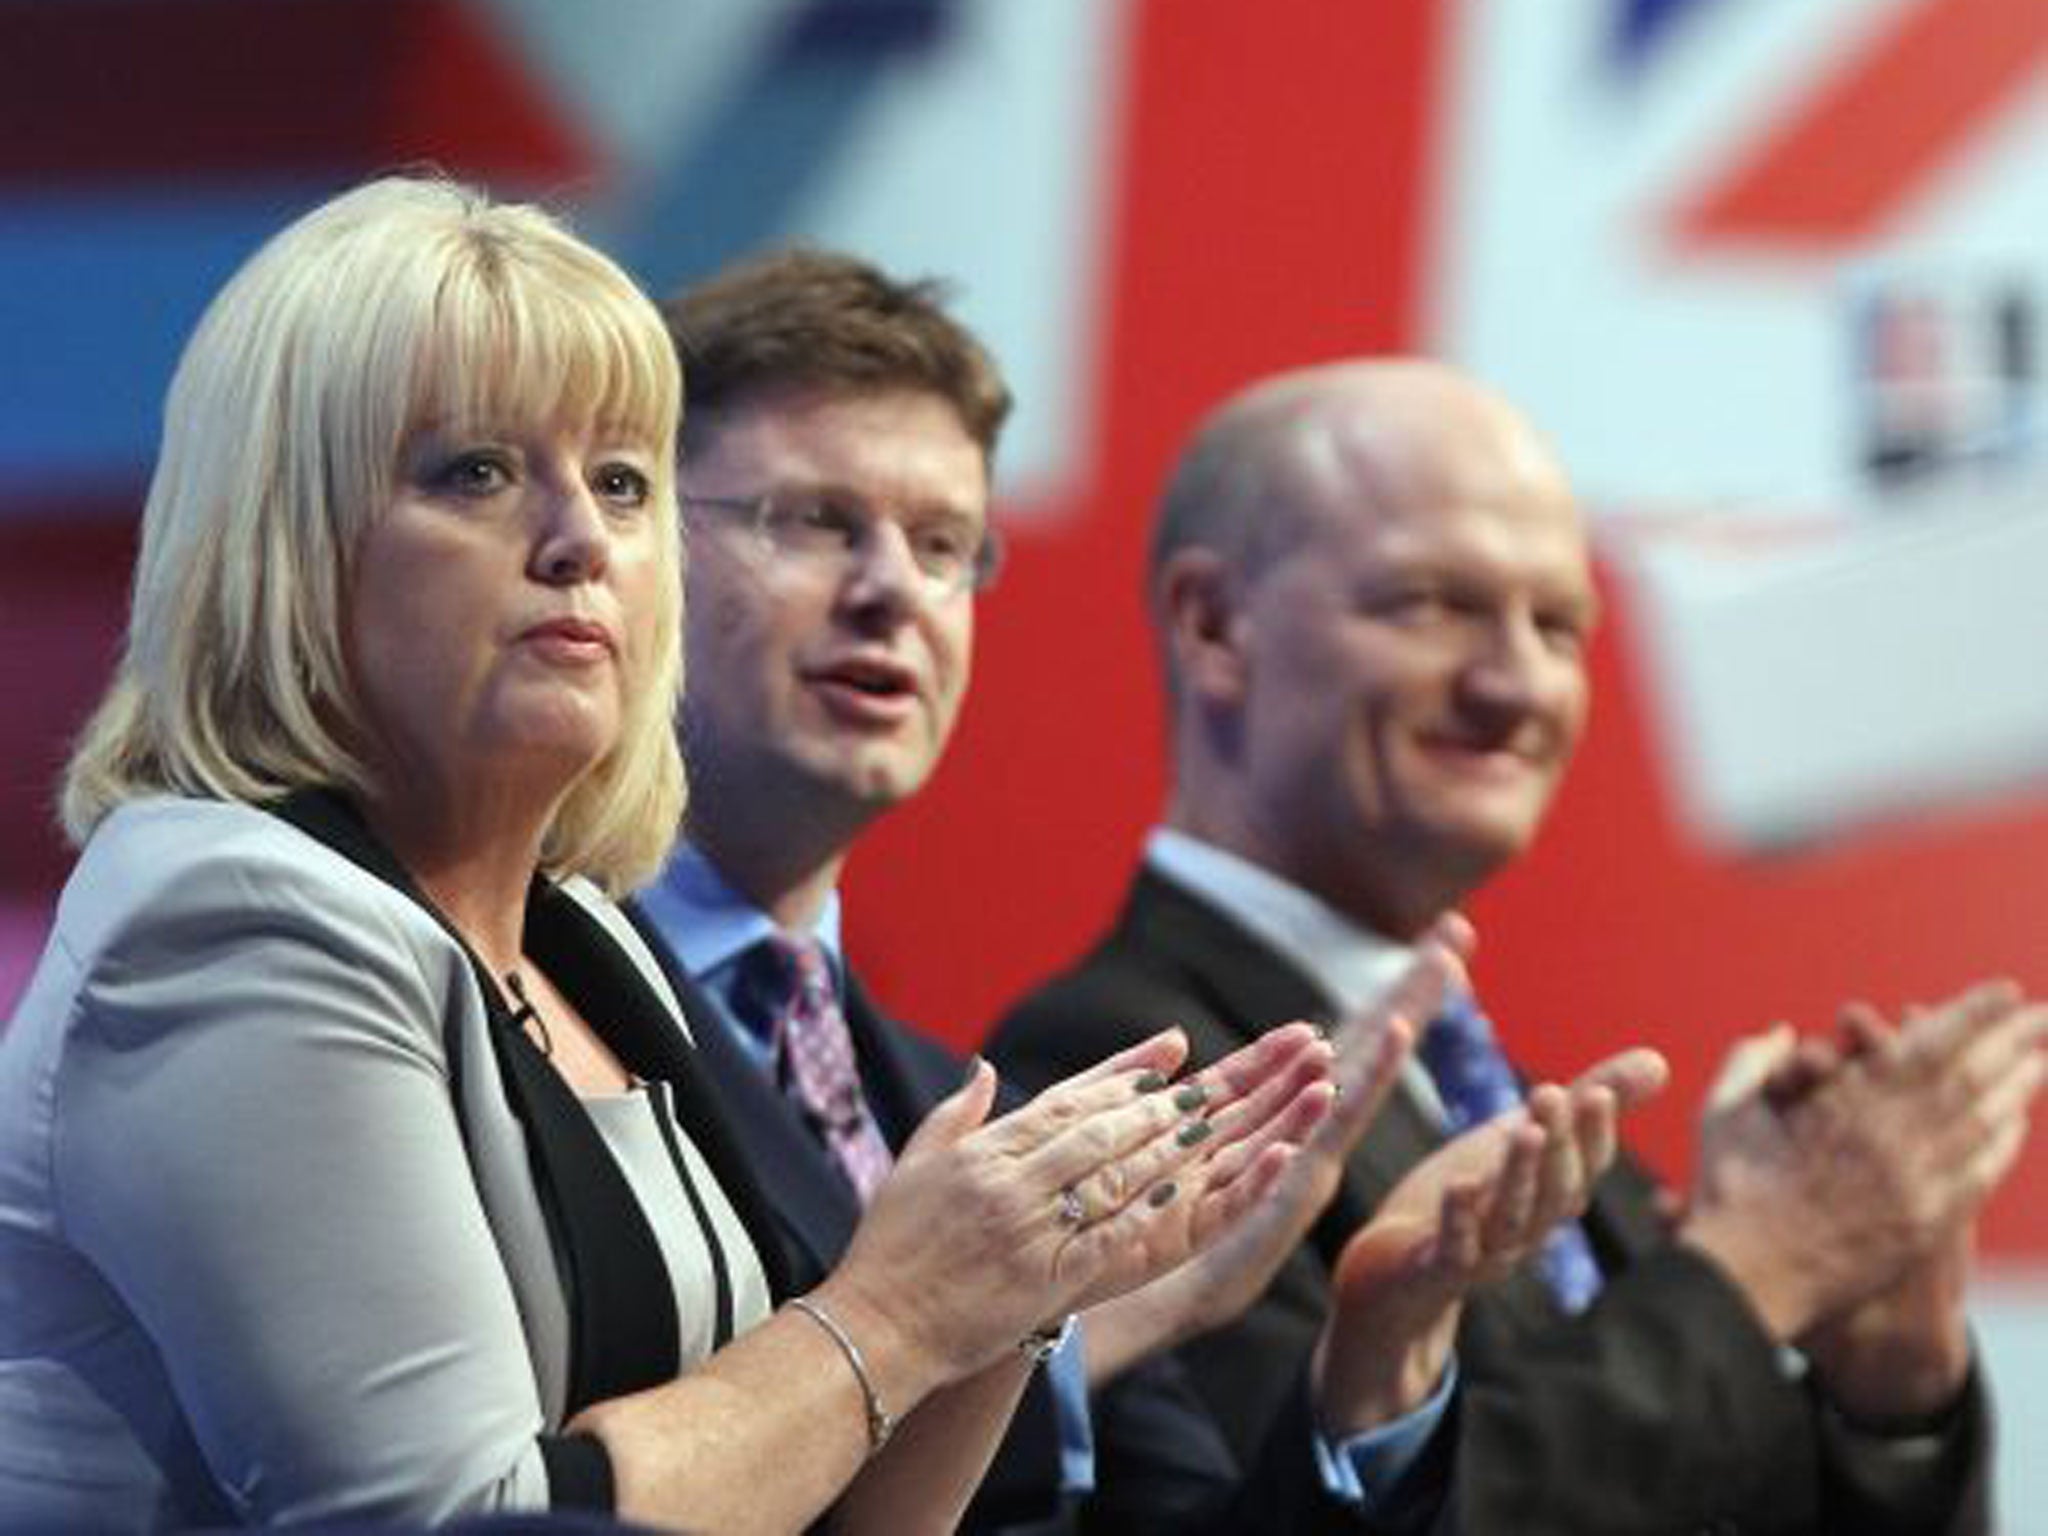 Baroness Helen Newlove, far left, at a Q&A session at the Conservative Party Conference in Manchester in 2011